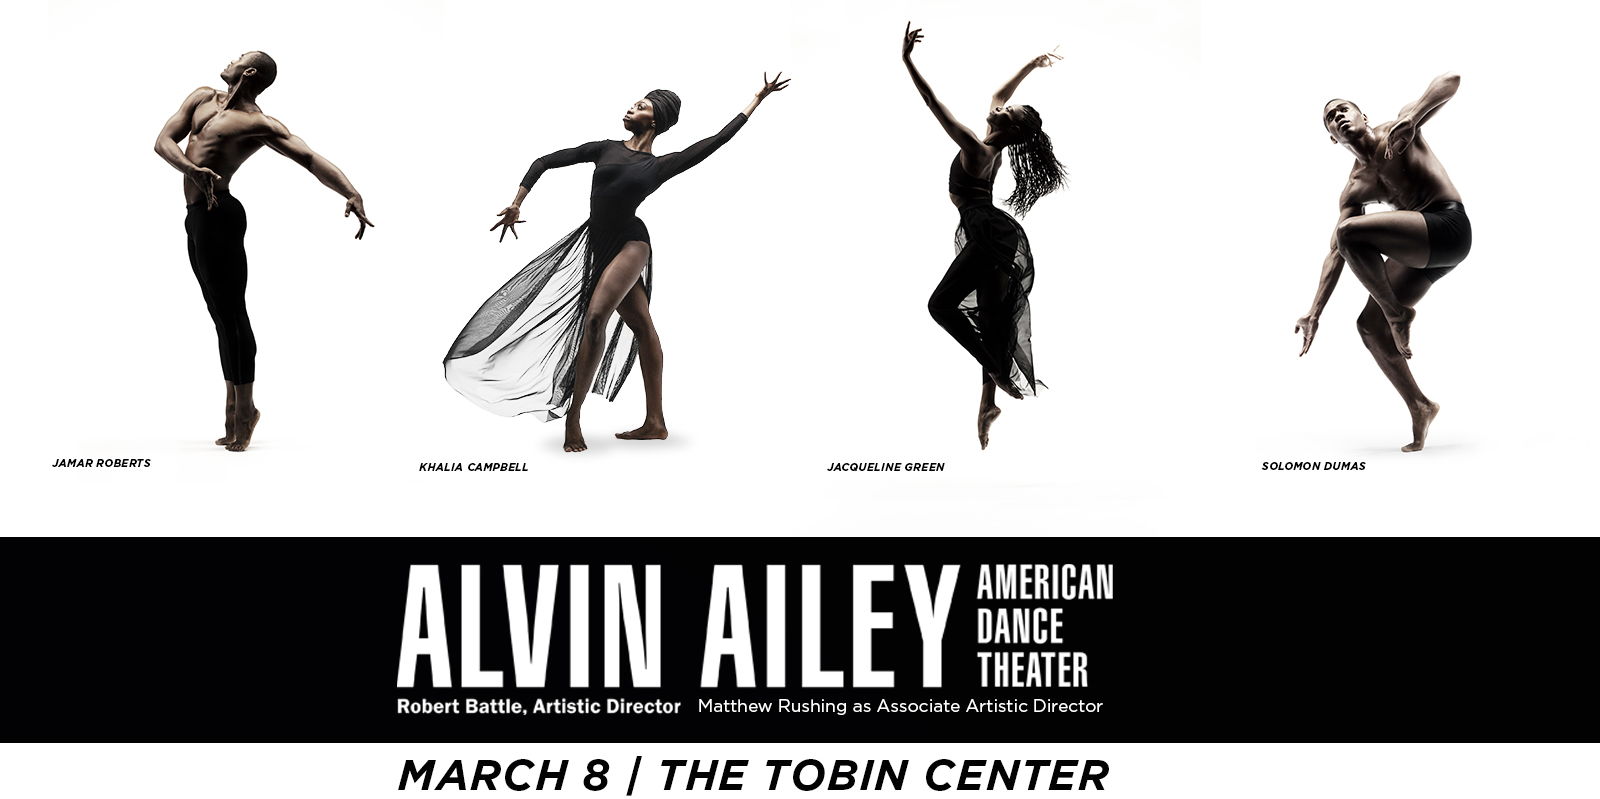 Alvin Ailey® American Dance Theater promotional image